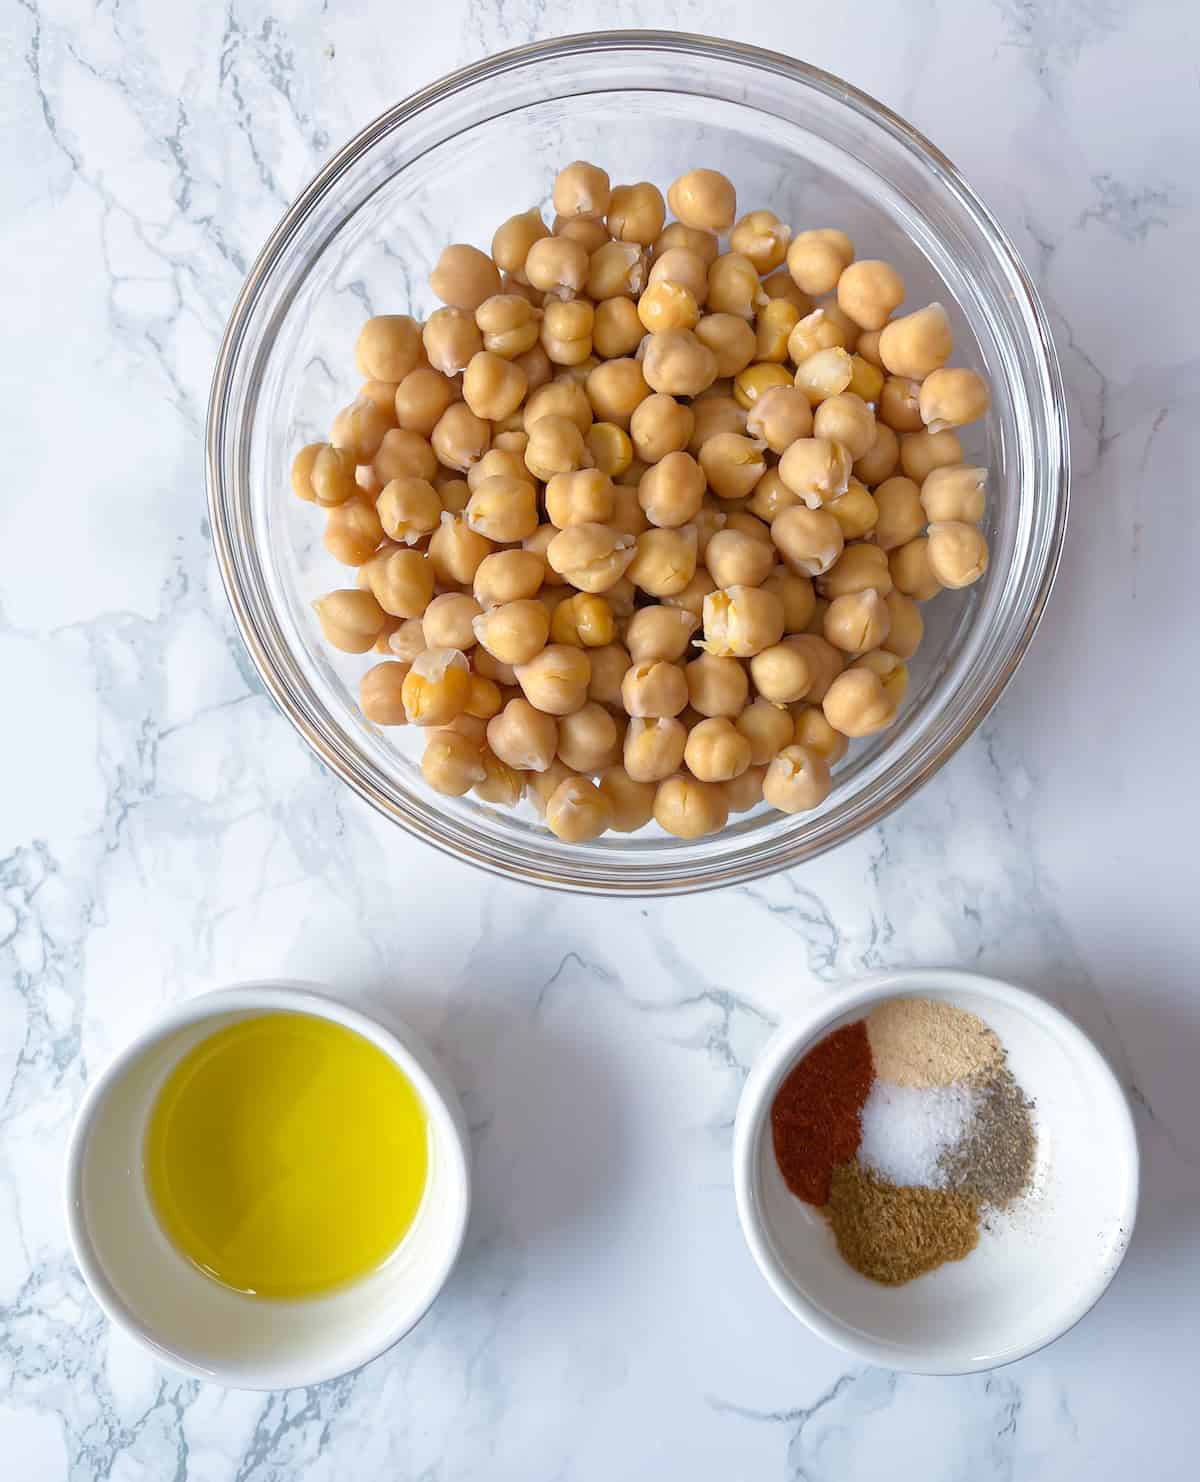 Ingredients for Mediterranean Roasted Chickpeas including canned chickpeas, extra-virgin olive oil, and a blend of spices